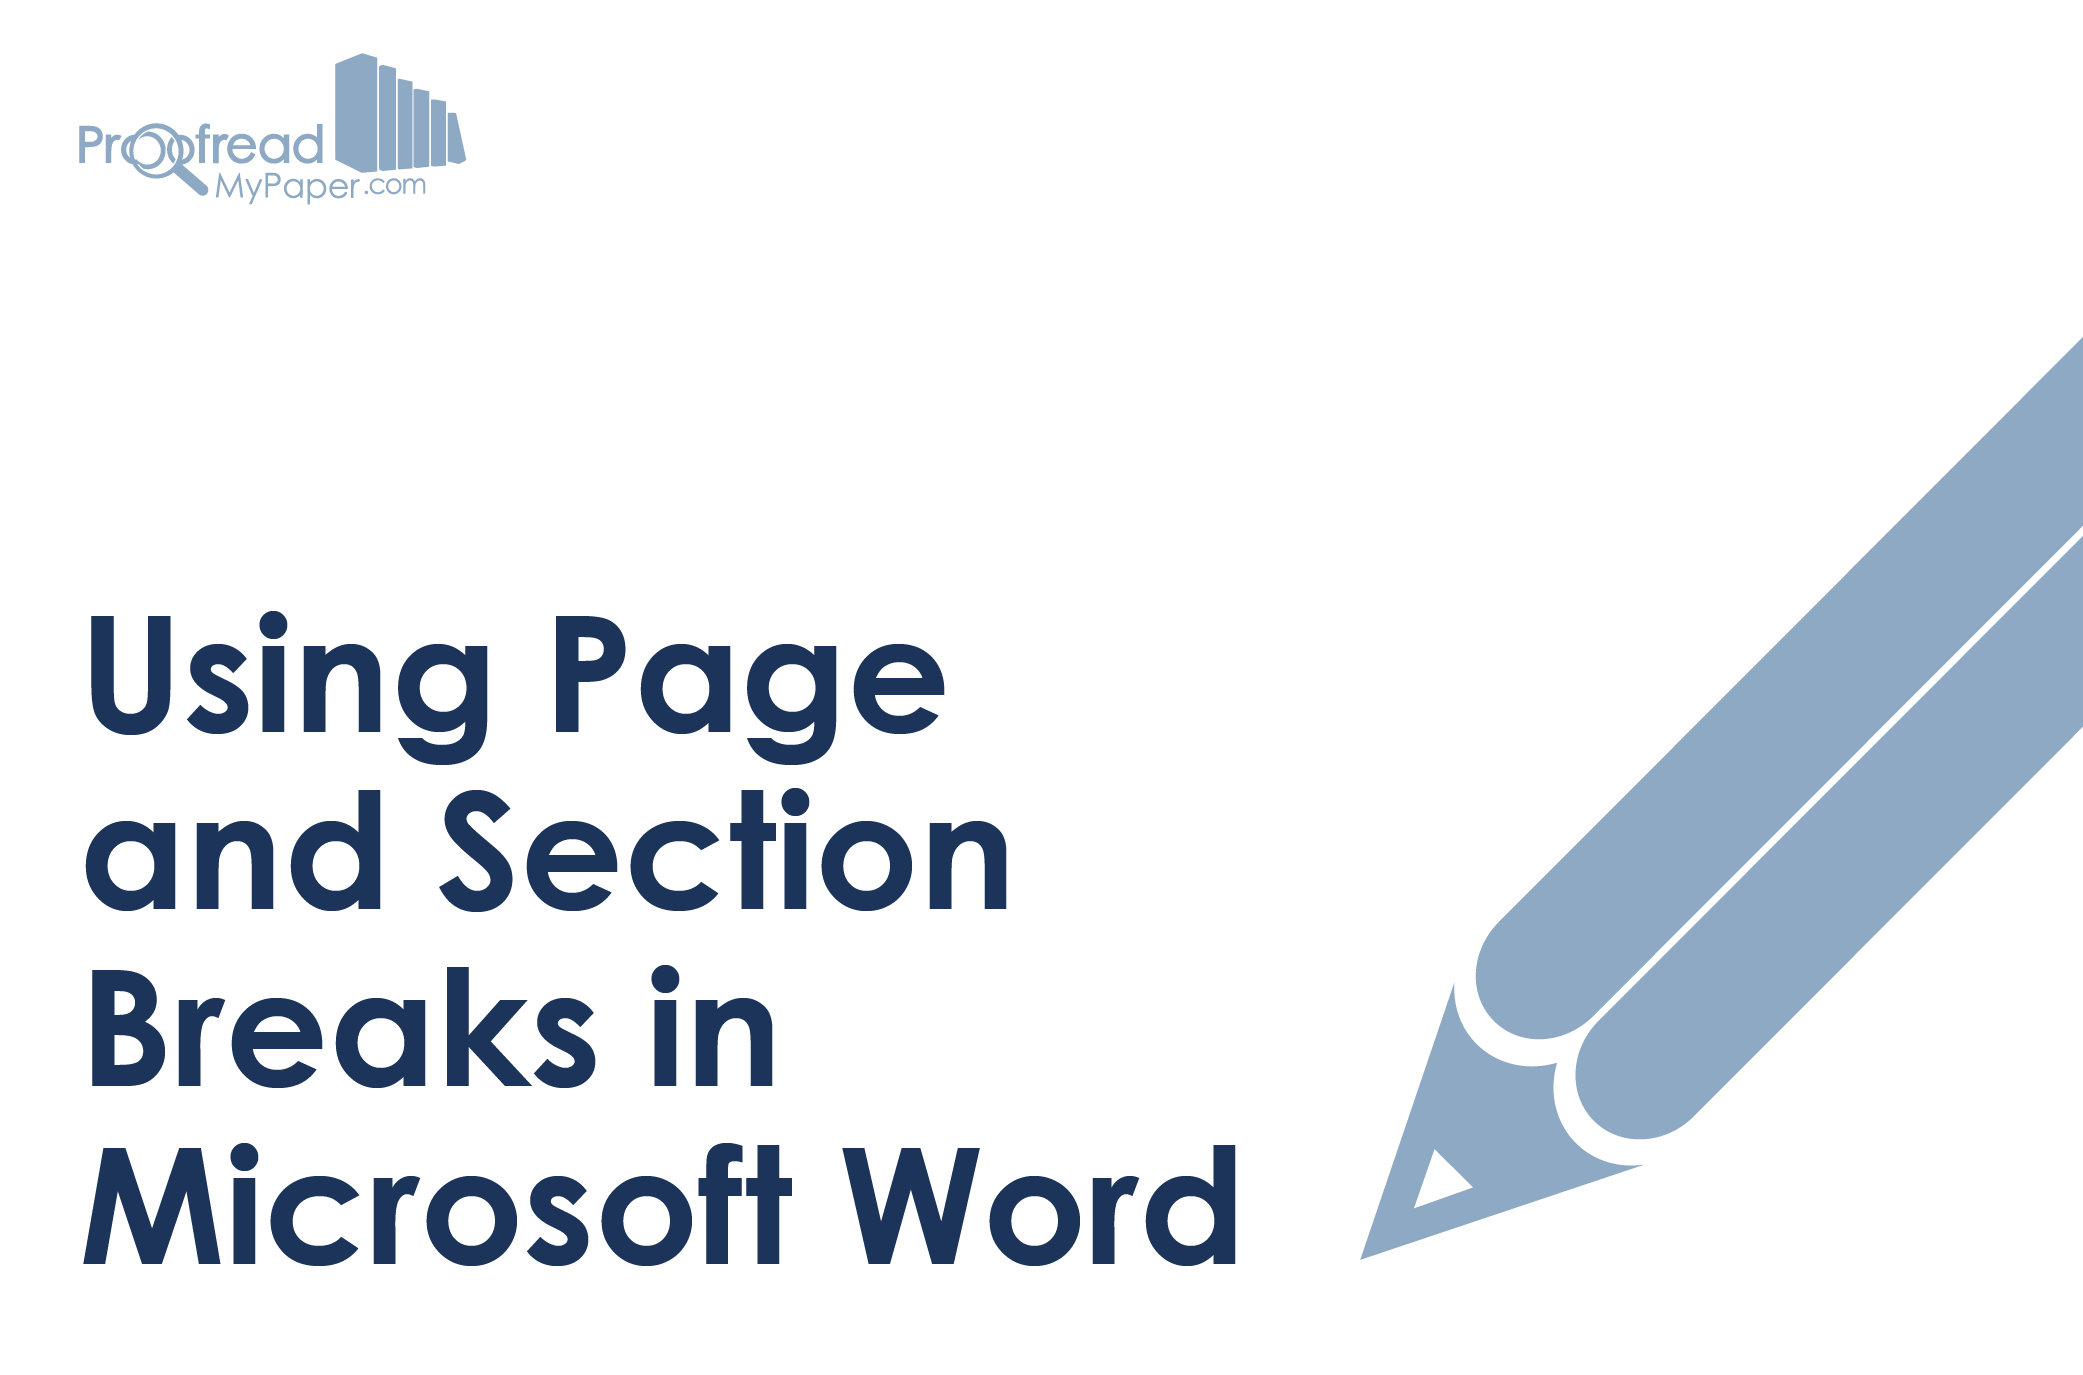 Using Page and Section Breaks in Microsoft Word